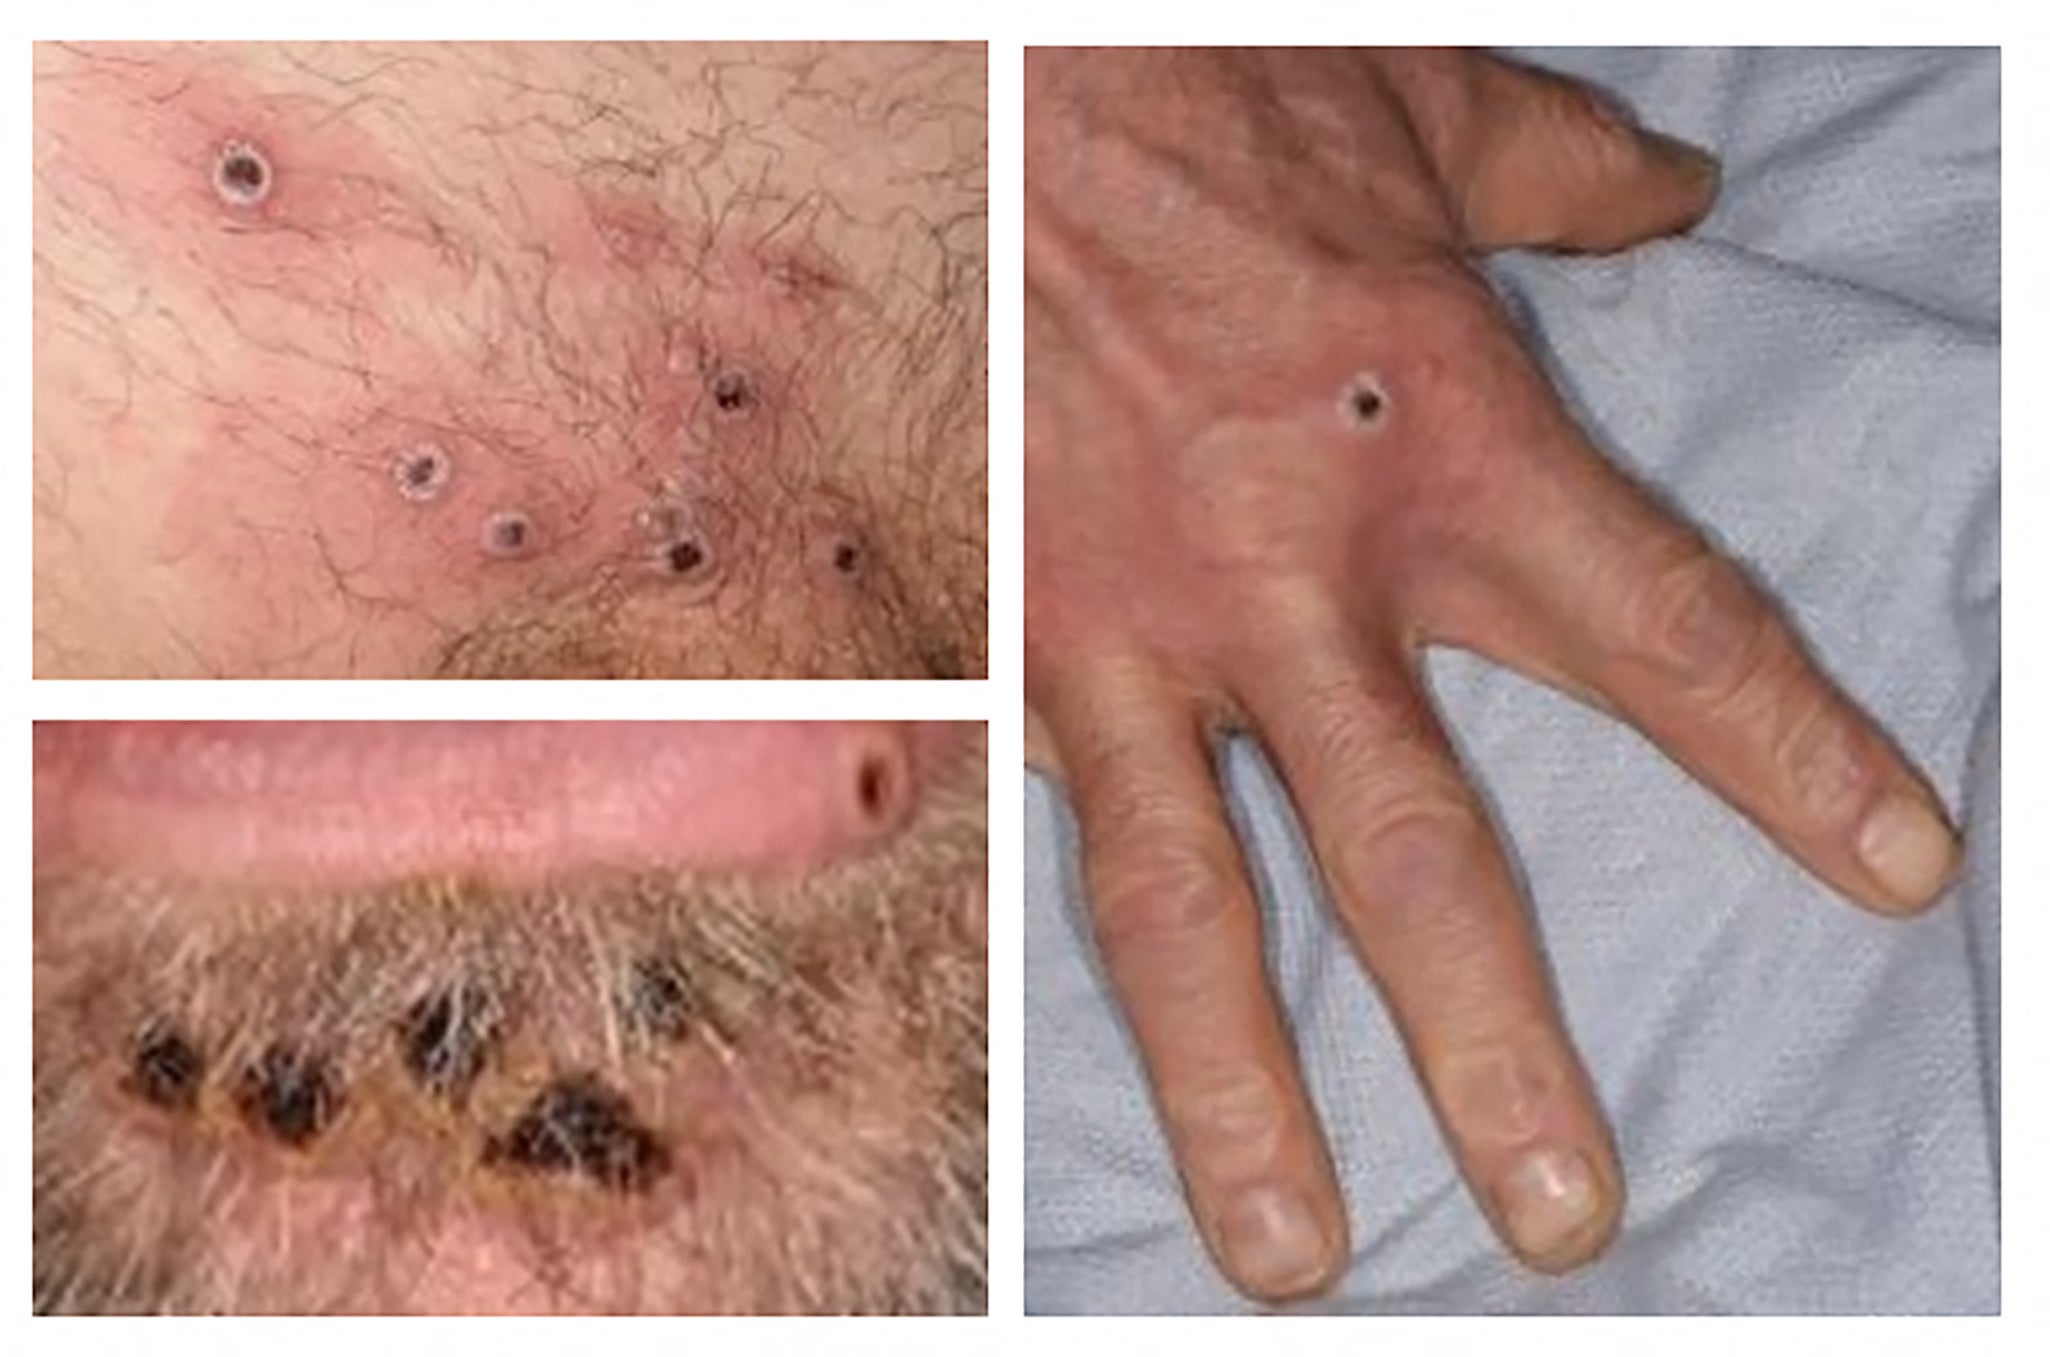 Signs of the monkeypox virus on a patient’s skin